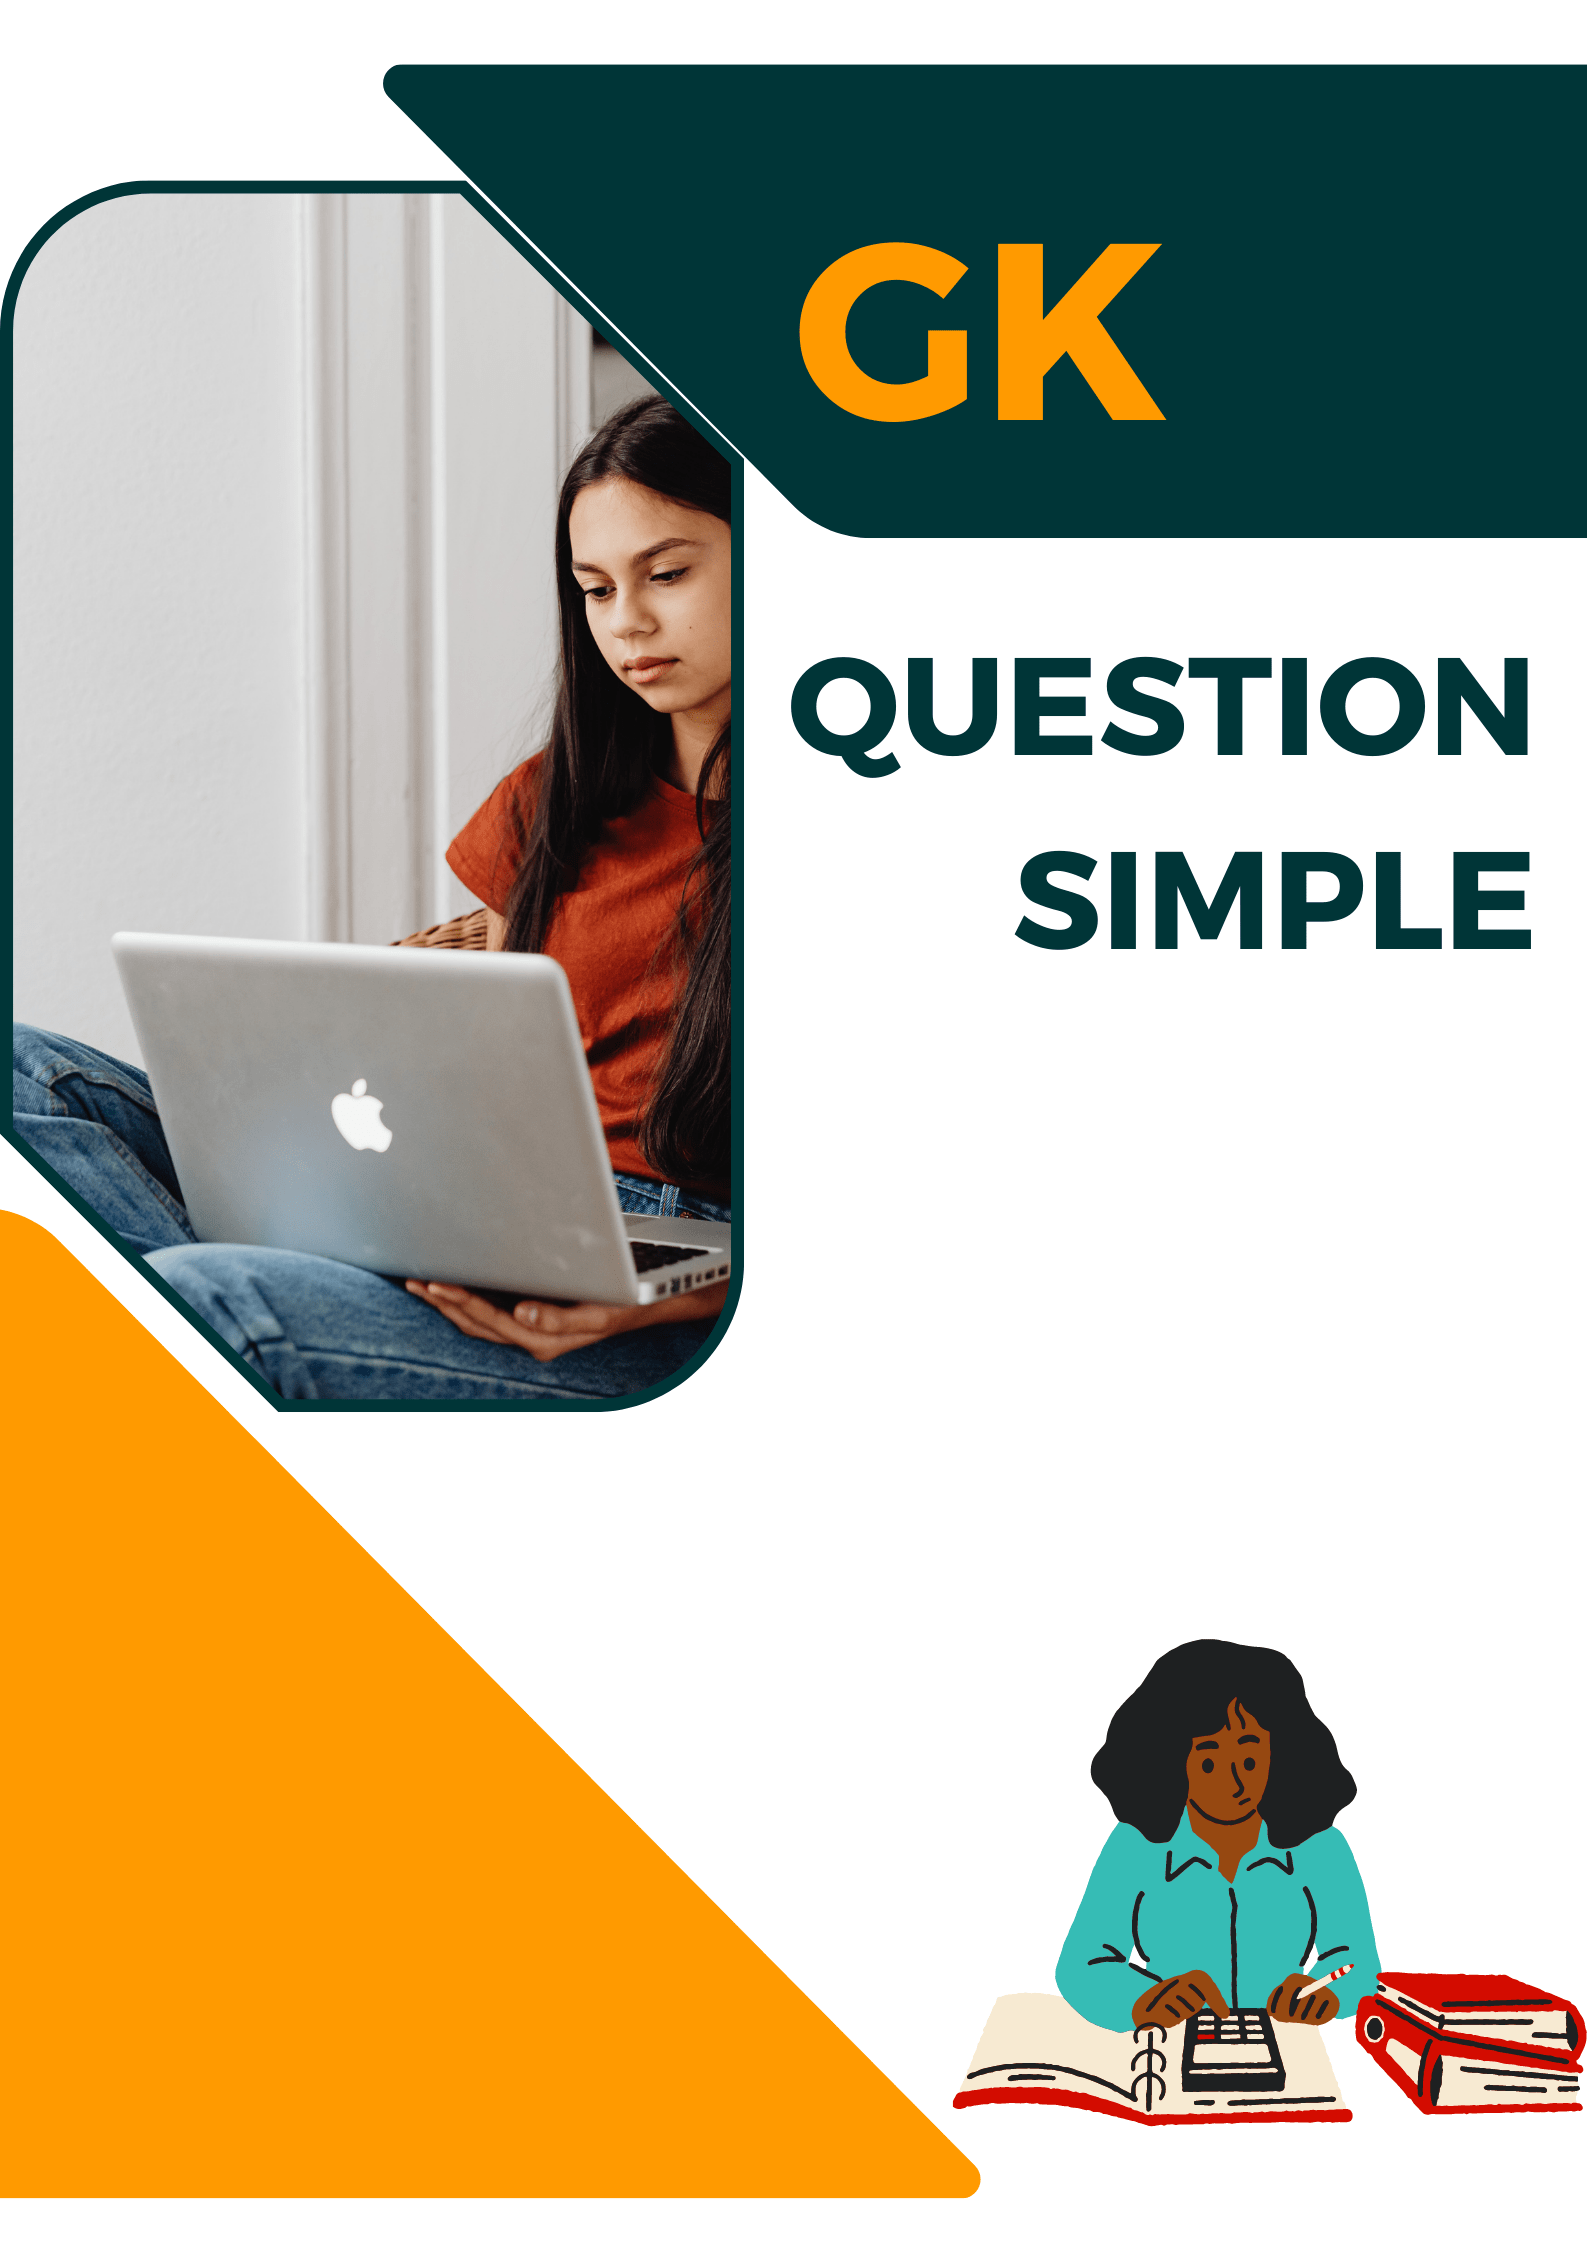 GK Question simple